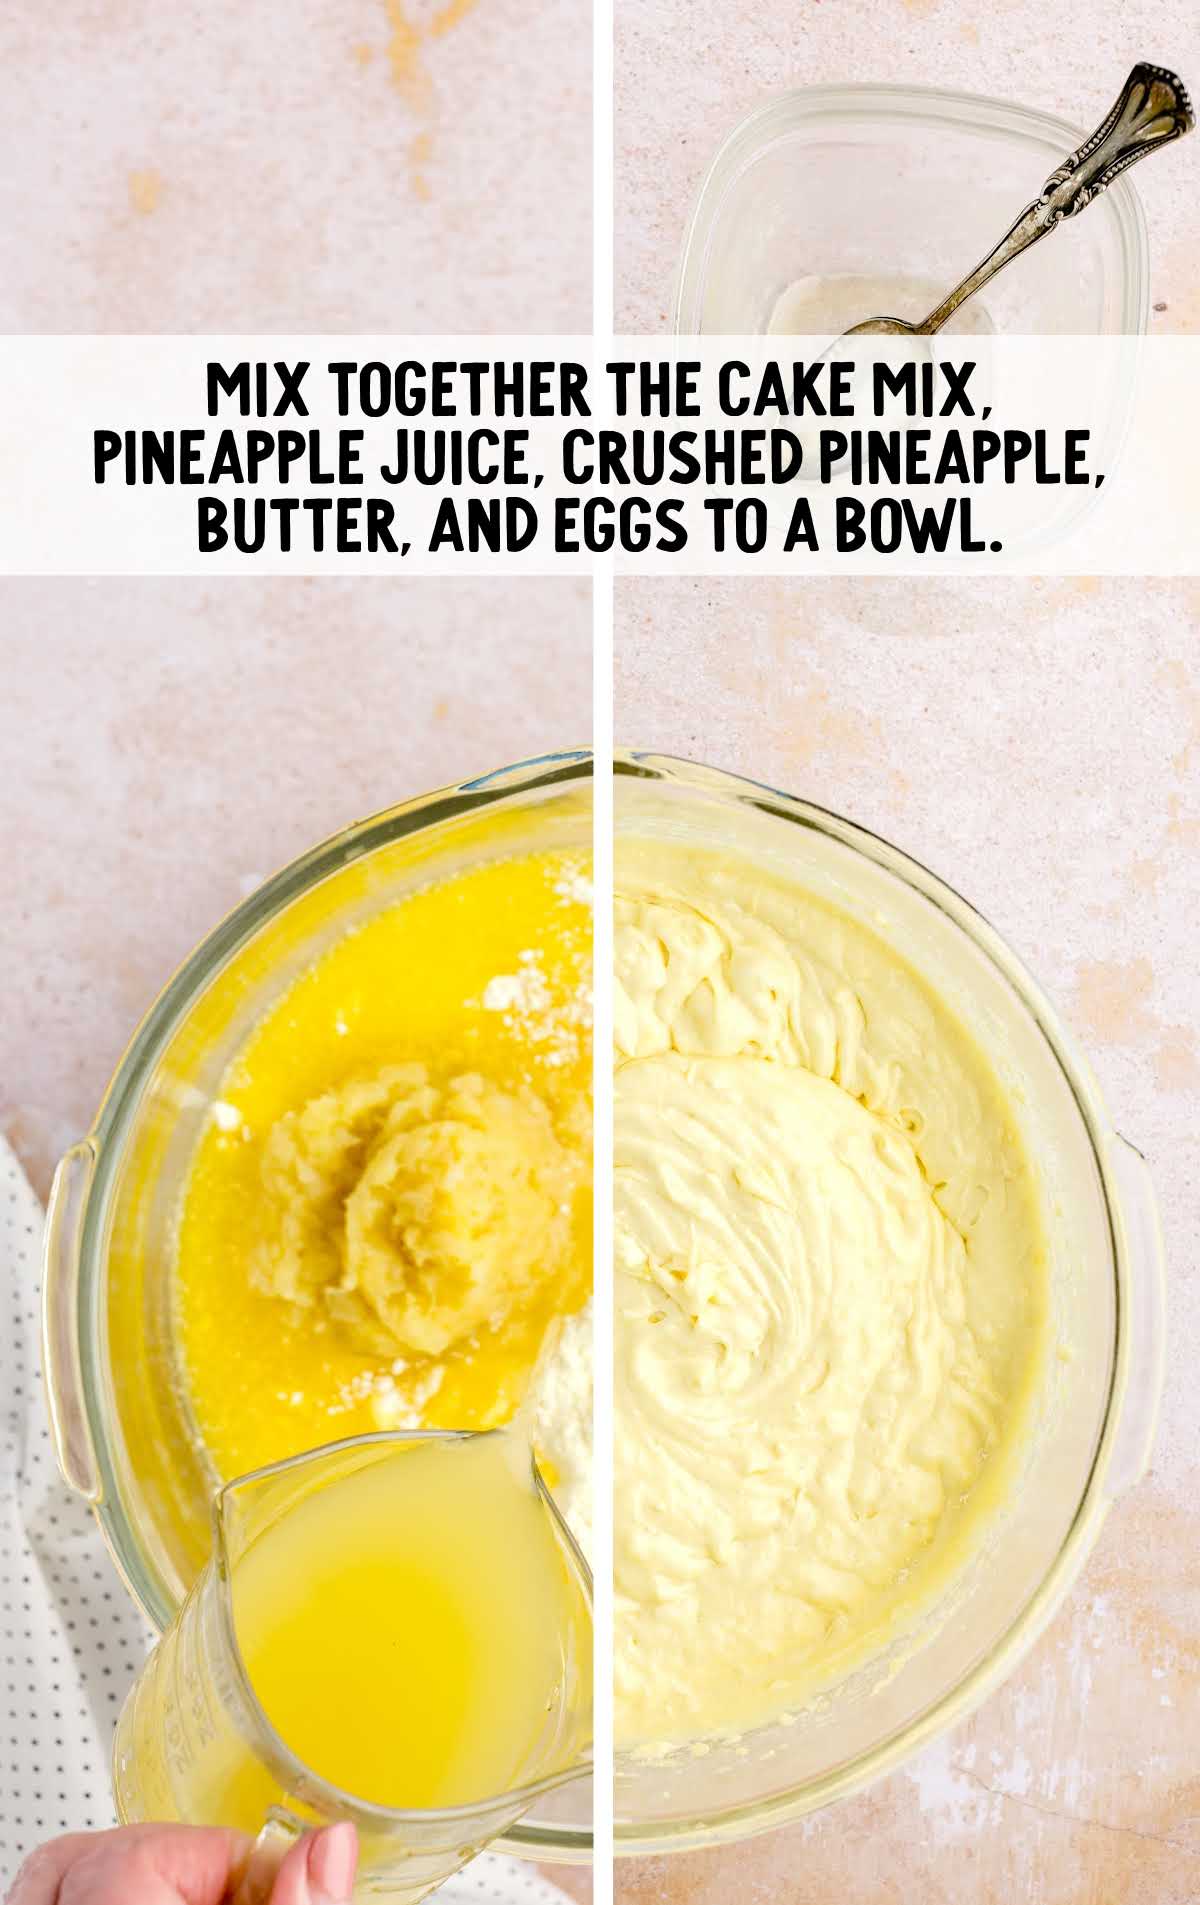 cake mix, pineapple juice, pineapple, butter, and eggs mixed in a bowl